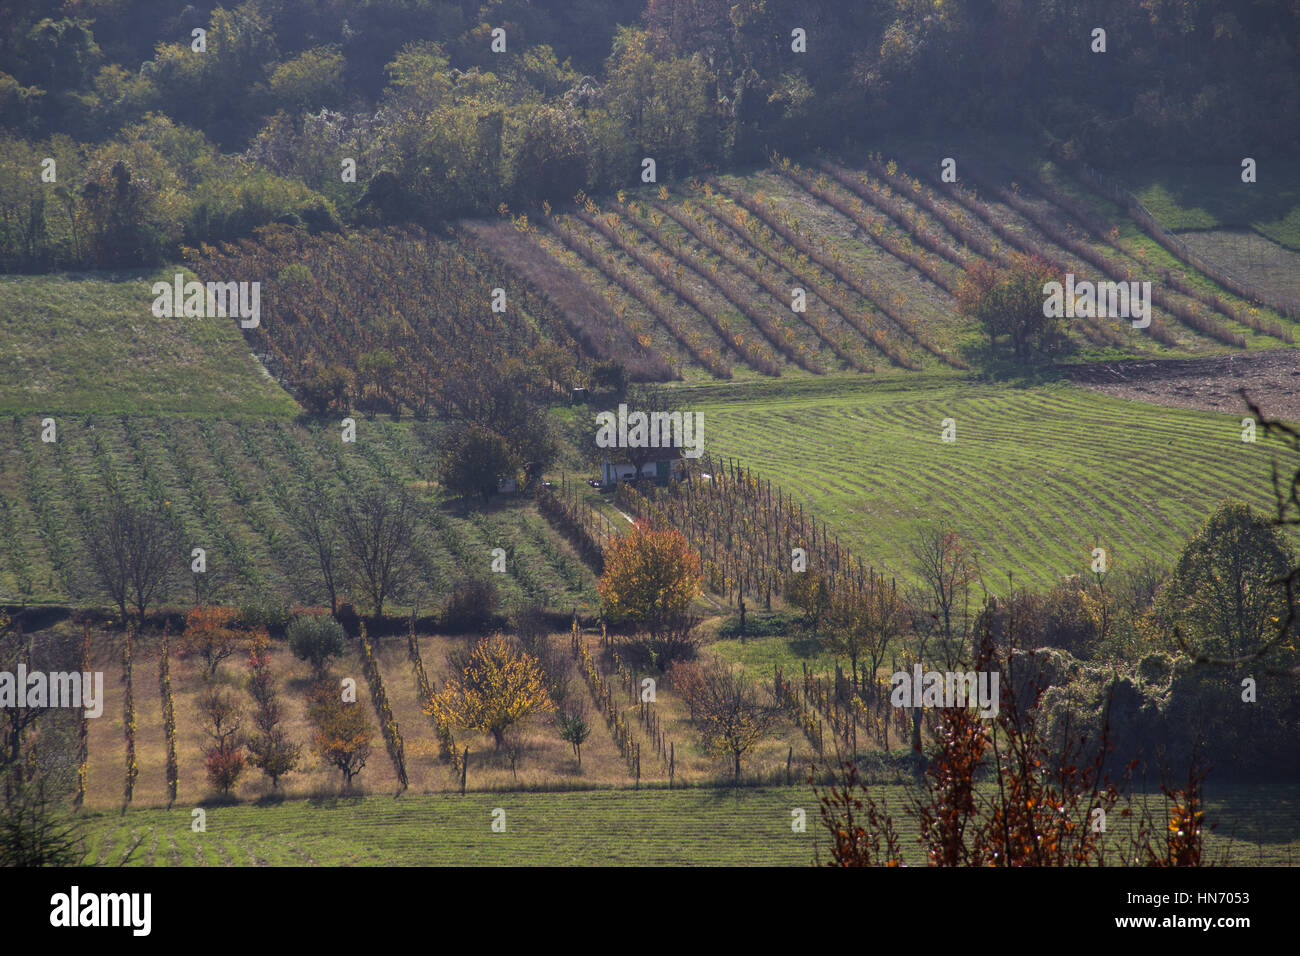 Sunny Fall Landscape In The Vineyard Stock Photo